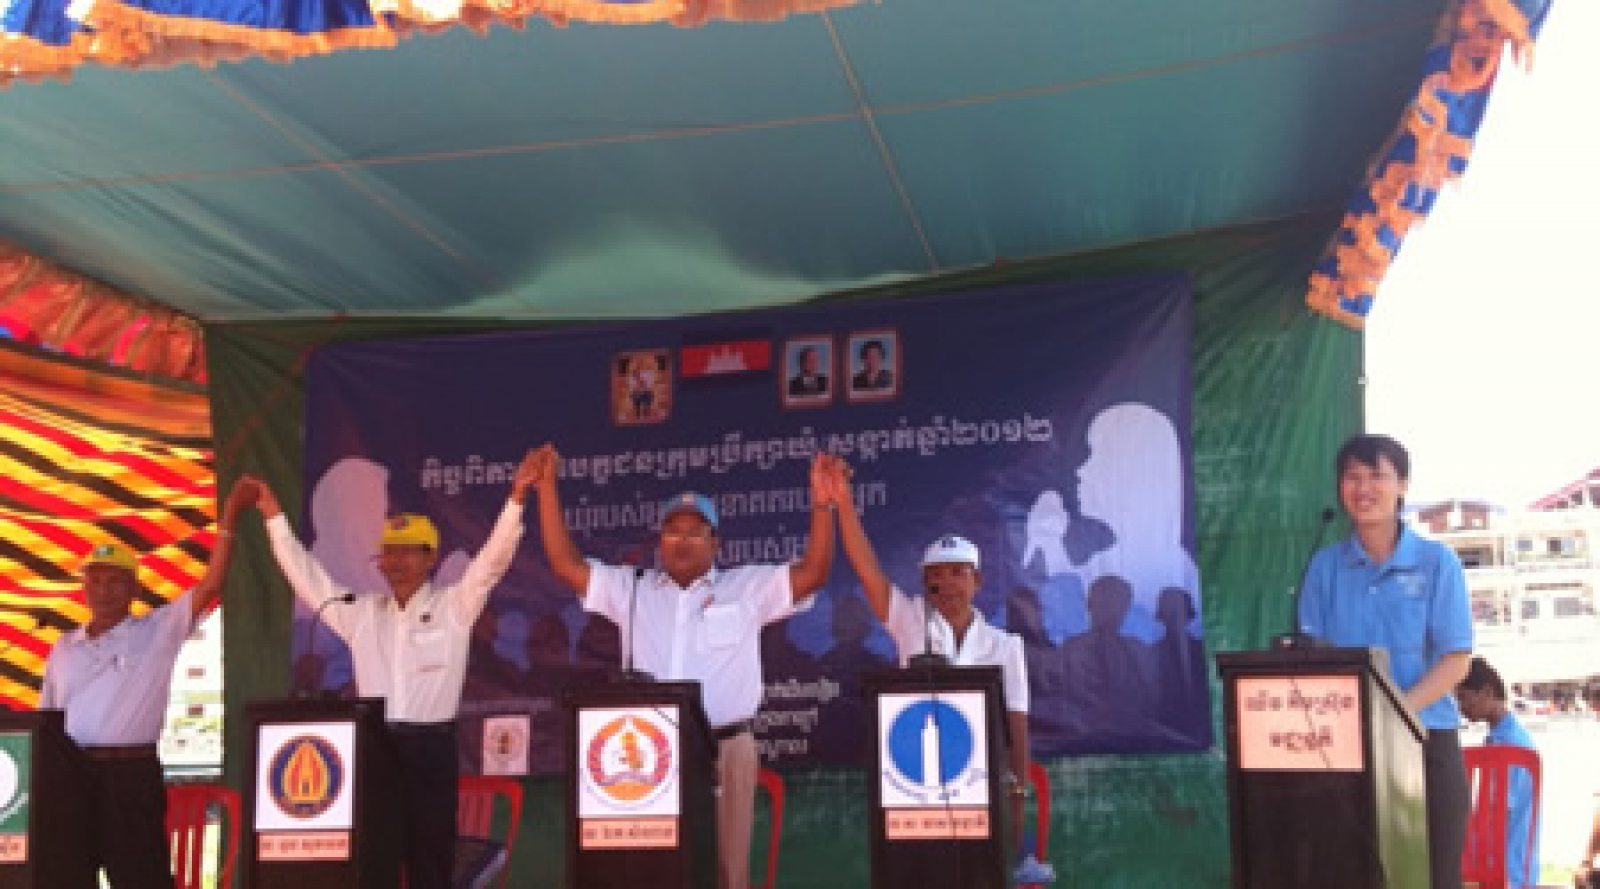 Cambodians Emphasize Issues Over Personality at Local Debates